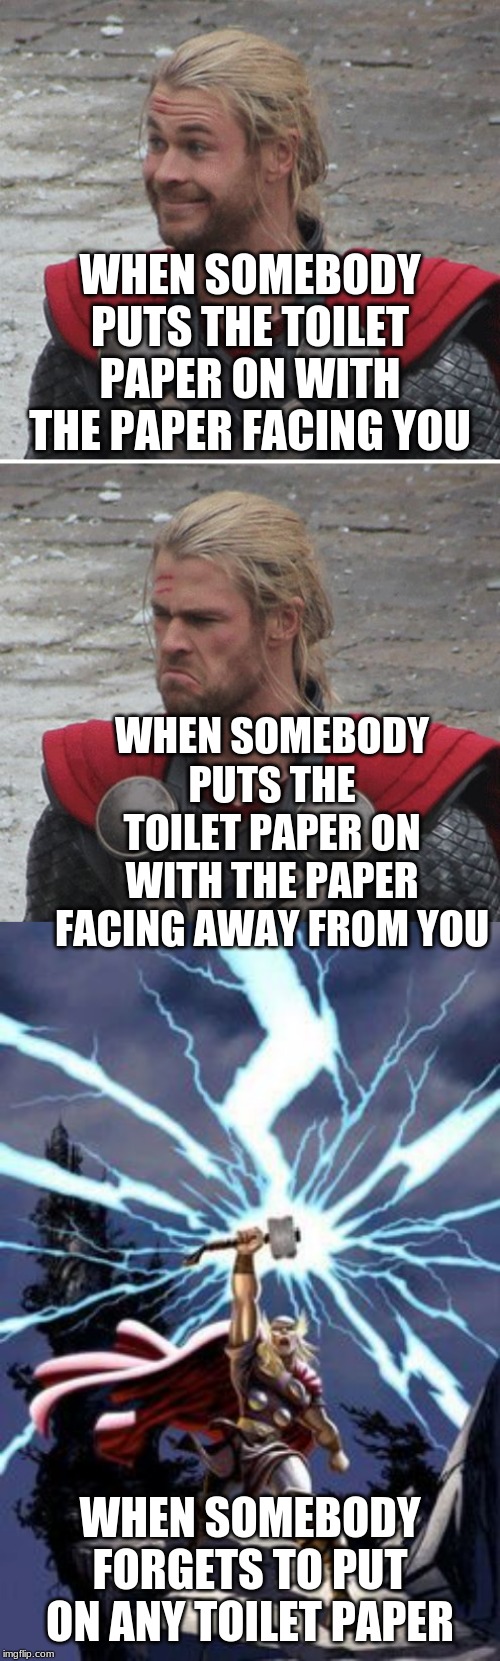 Thor Knows the Right Way Toilet Paper Goes! | WHEN SOMEBODY PUTS THE TOILET PAPER ON WITH THE PAPER FACING YOU; WHEN SOMEBODY PUTS THE TOILET PAPER ON WITH THE PAPER FACING AWAY FROM YOU; WHEN SOMEBODY FORGETS TO PUT ON ANY TOILET PAPER | image tagged in thor with lightning,thor happy then sad | made w/ Imgflip meme maker